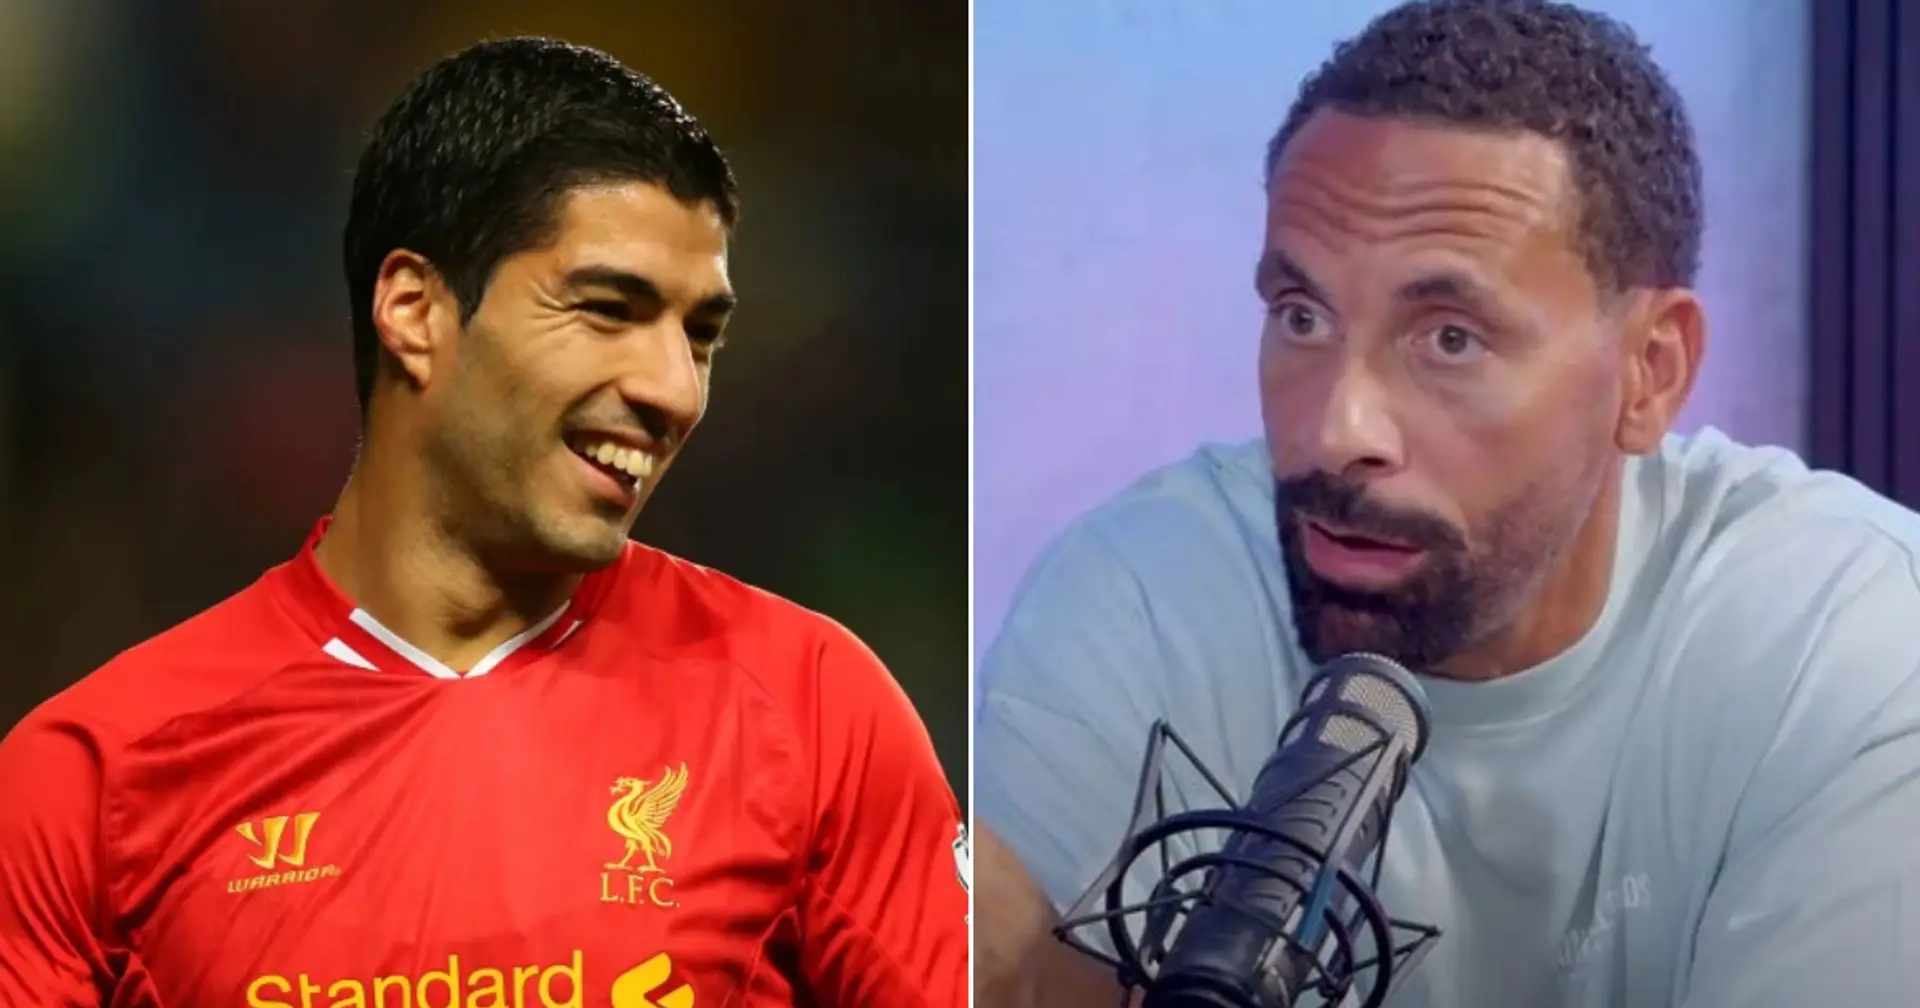 'Got a scar on my foot': Rio Ferdinand names 3 Liverpool players he 'hated'